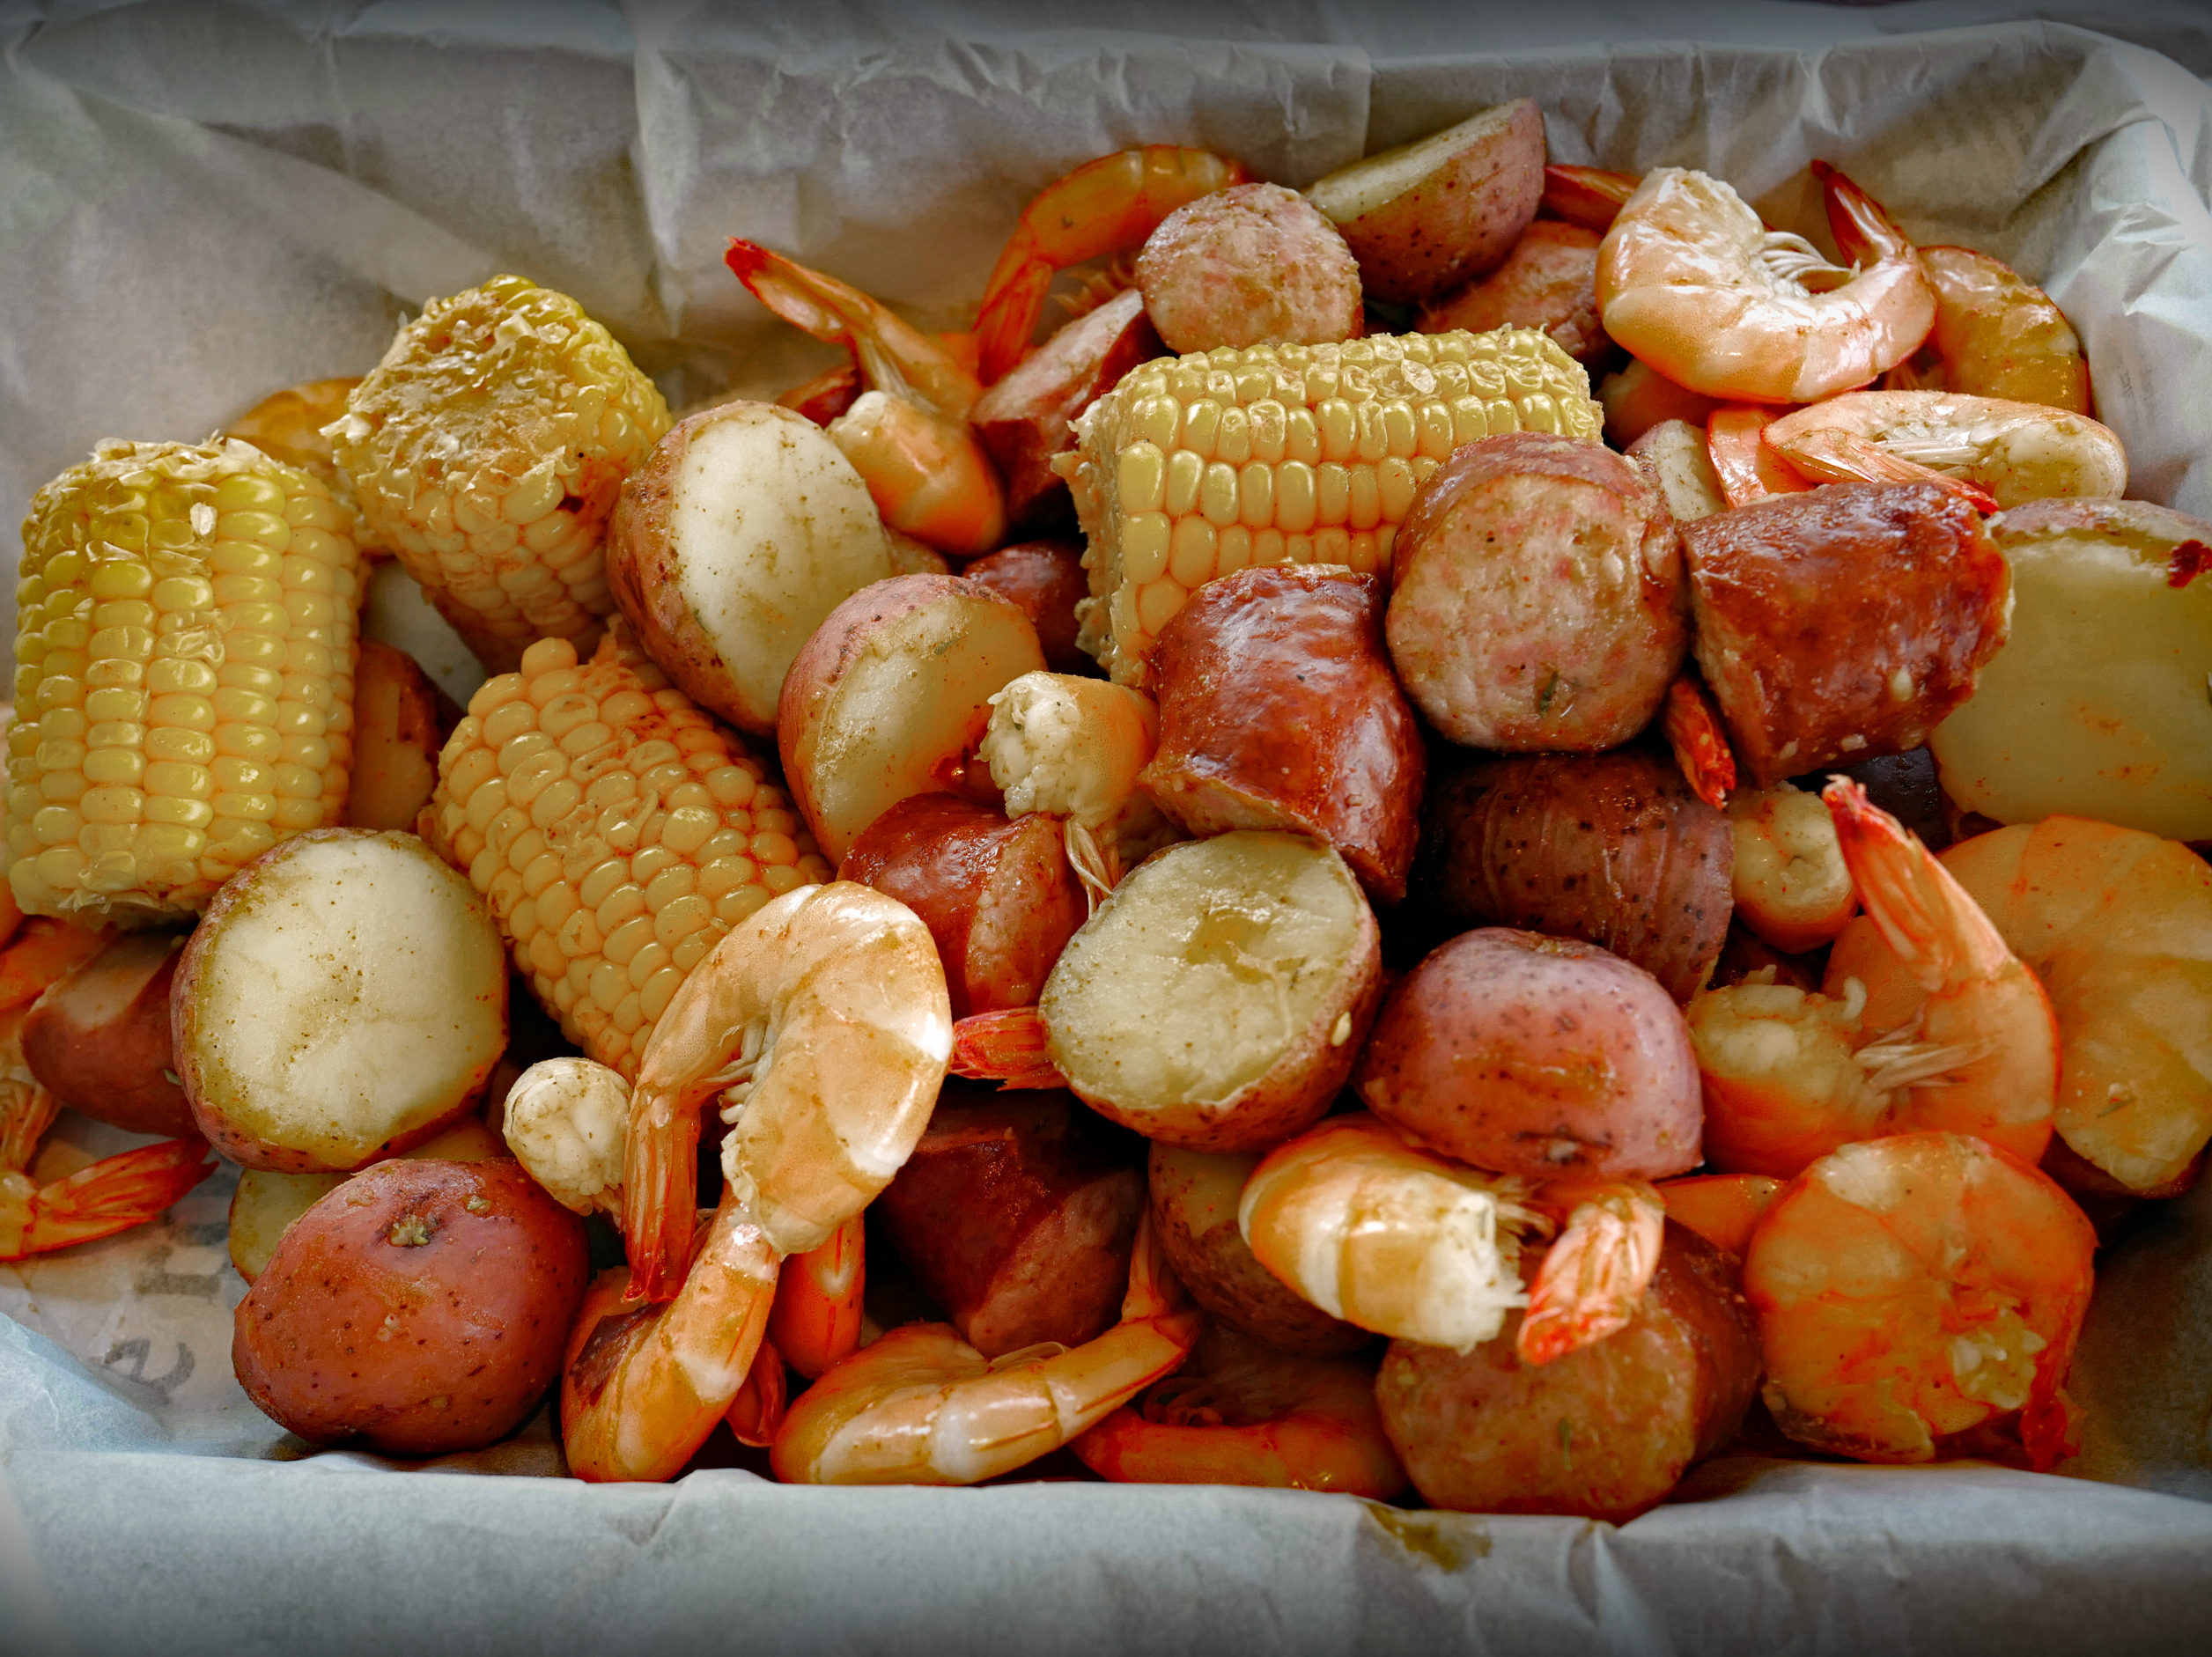 Spicy shrimp, corn, potatoes and sausage all heaped together